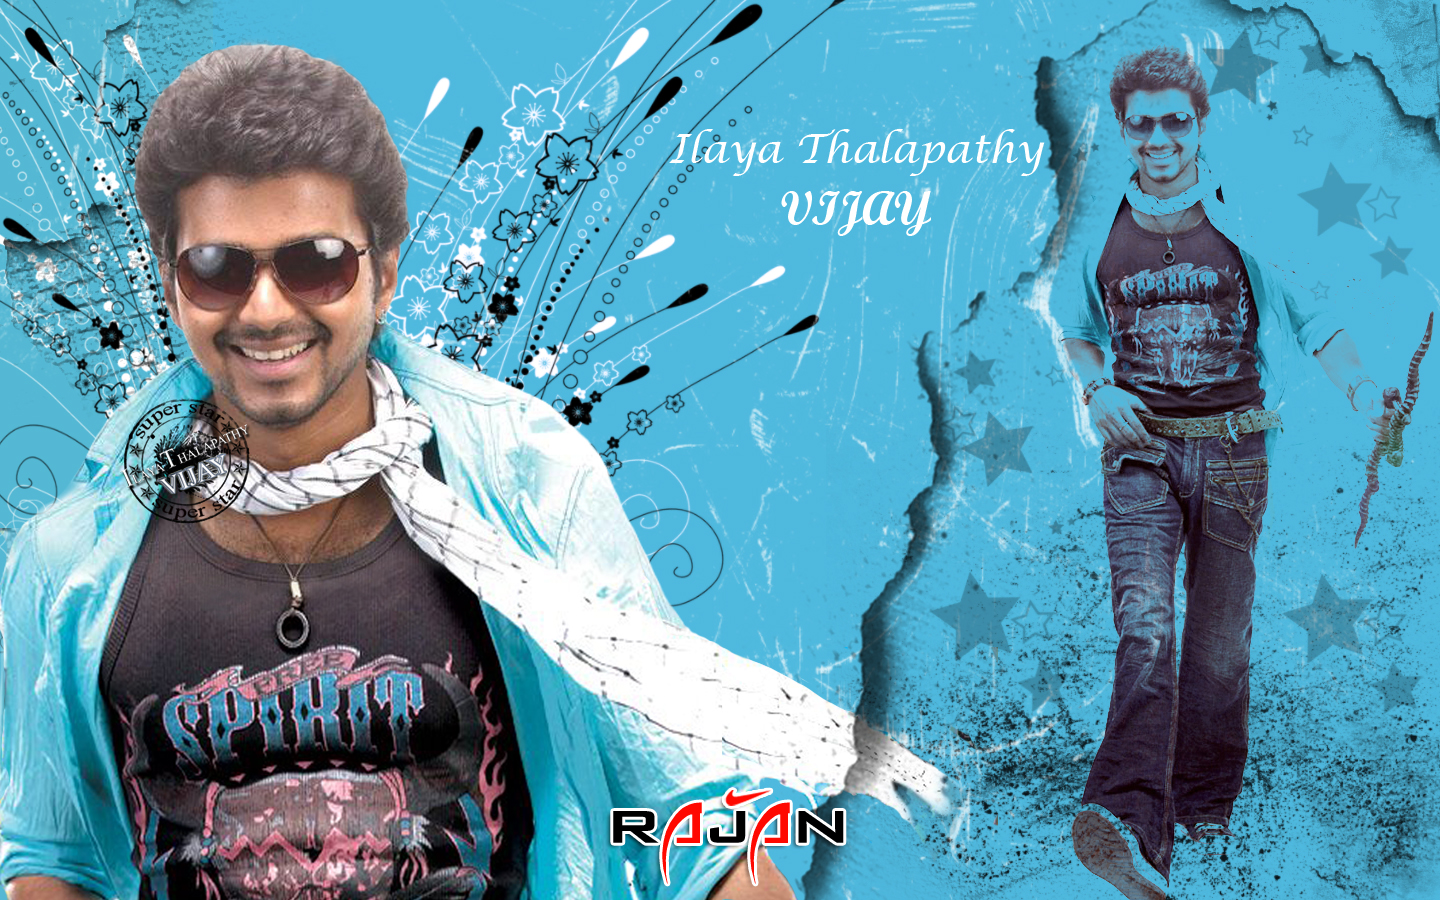 villu wallpapers search reasult Free Wallpapers | Screensavers | Movie stills | Mobile photos images